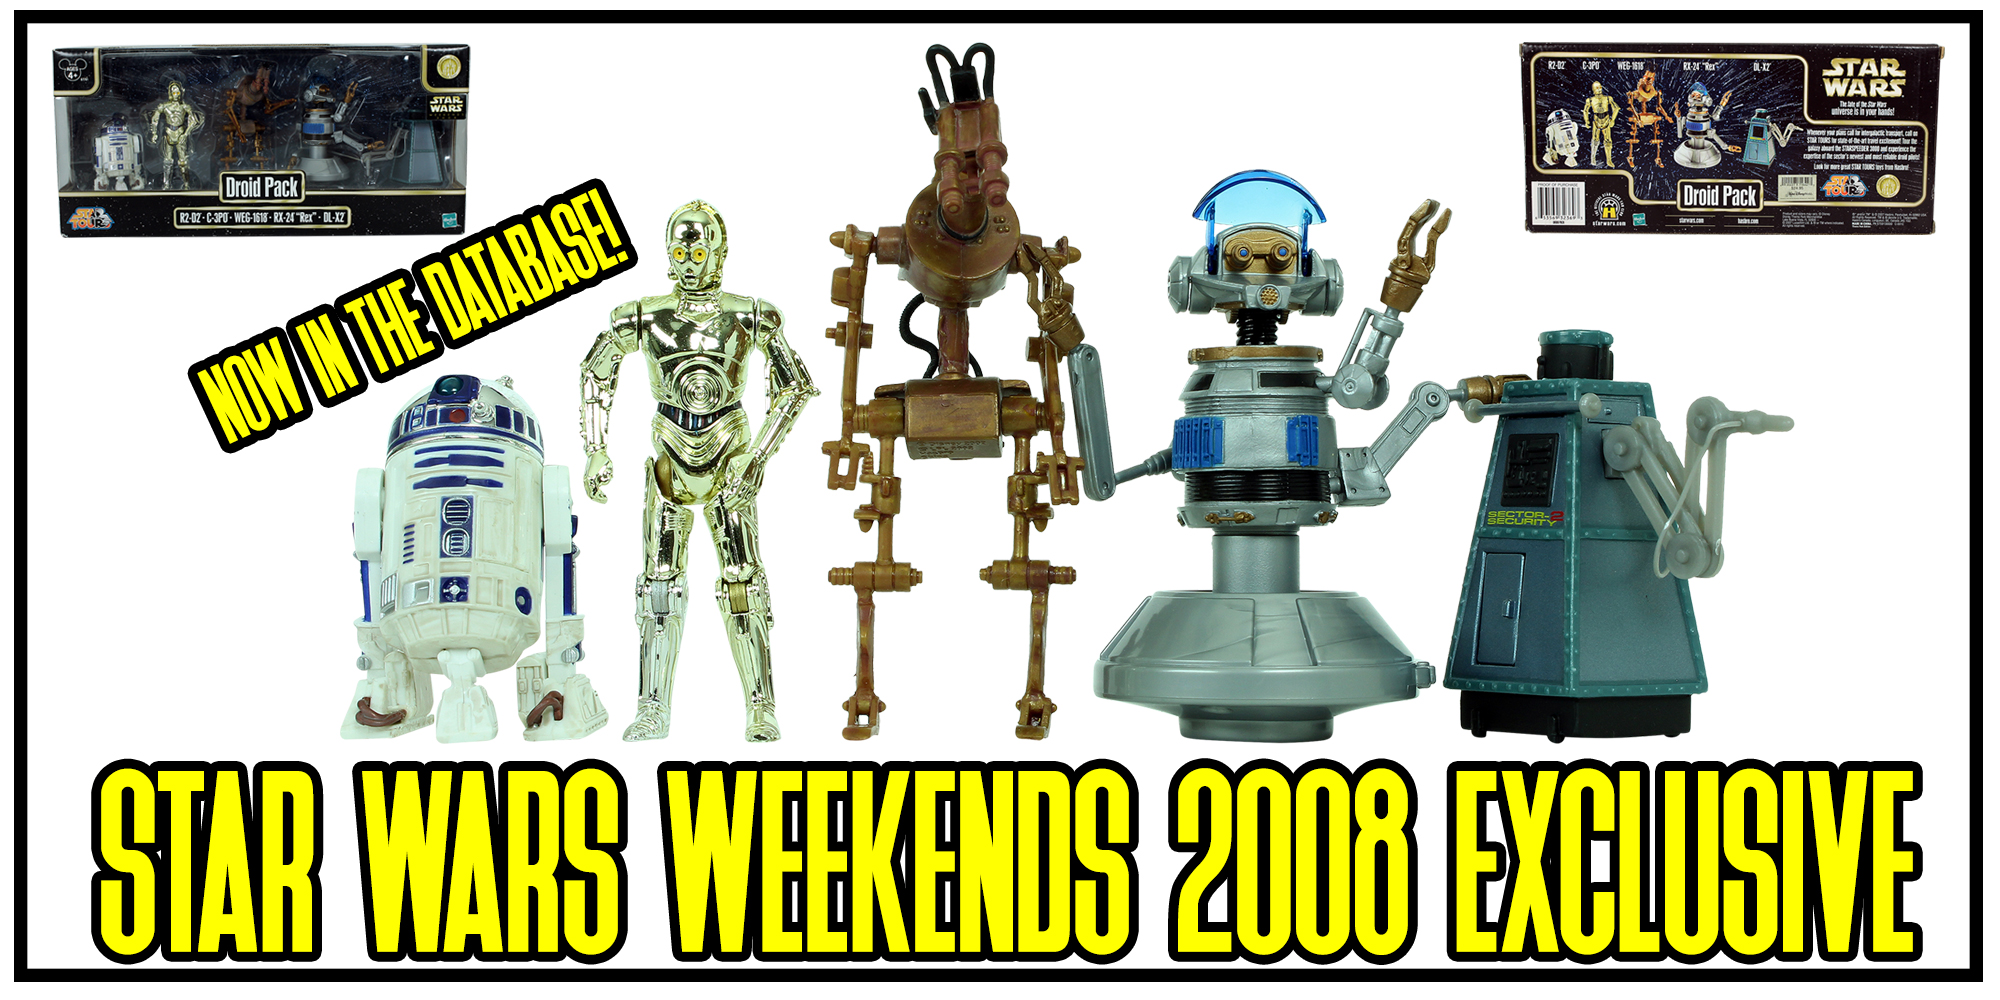 New Addition: Disney Weekends 2008 Droid 5-Pack